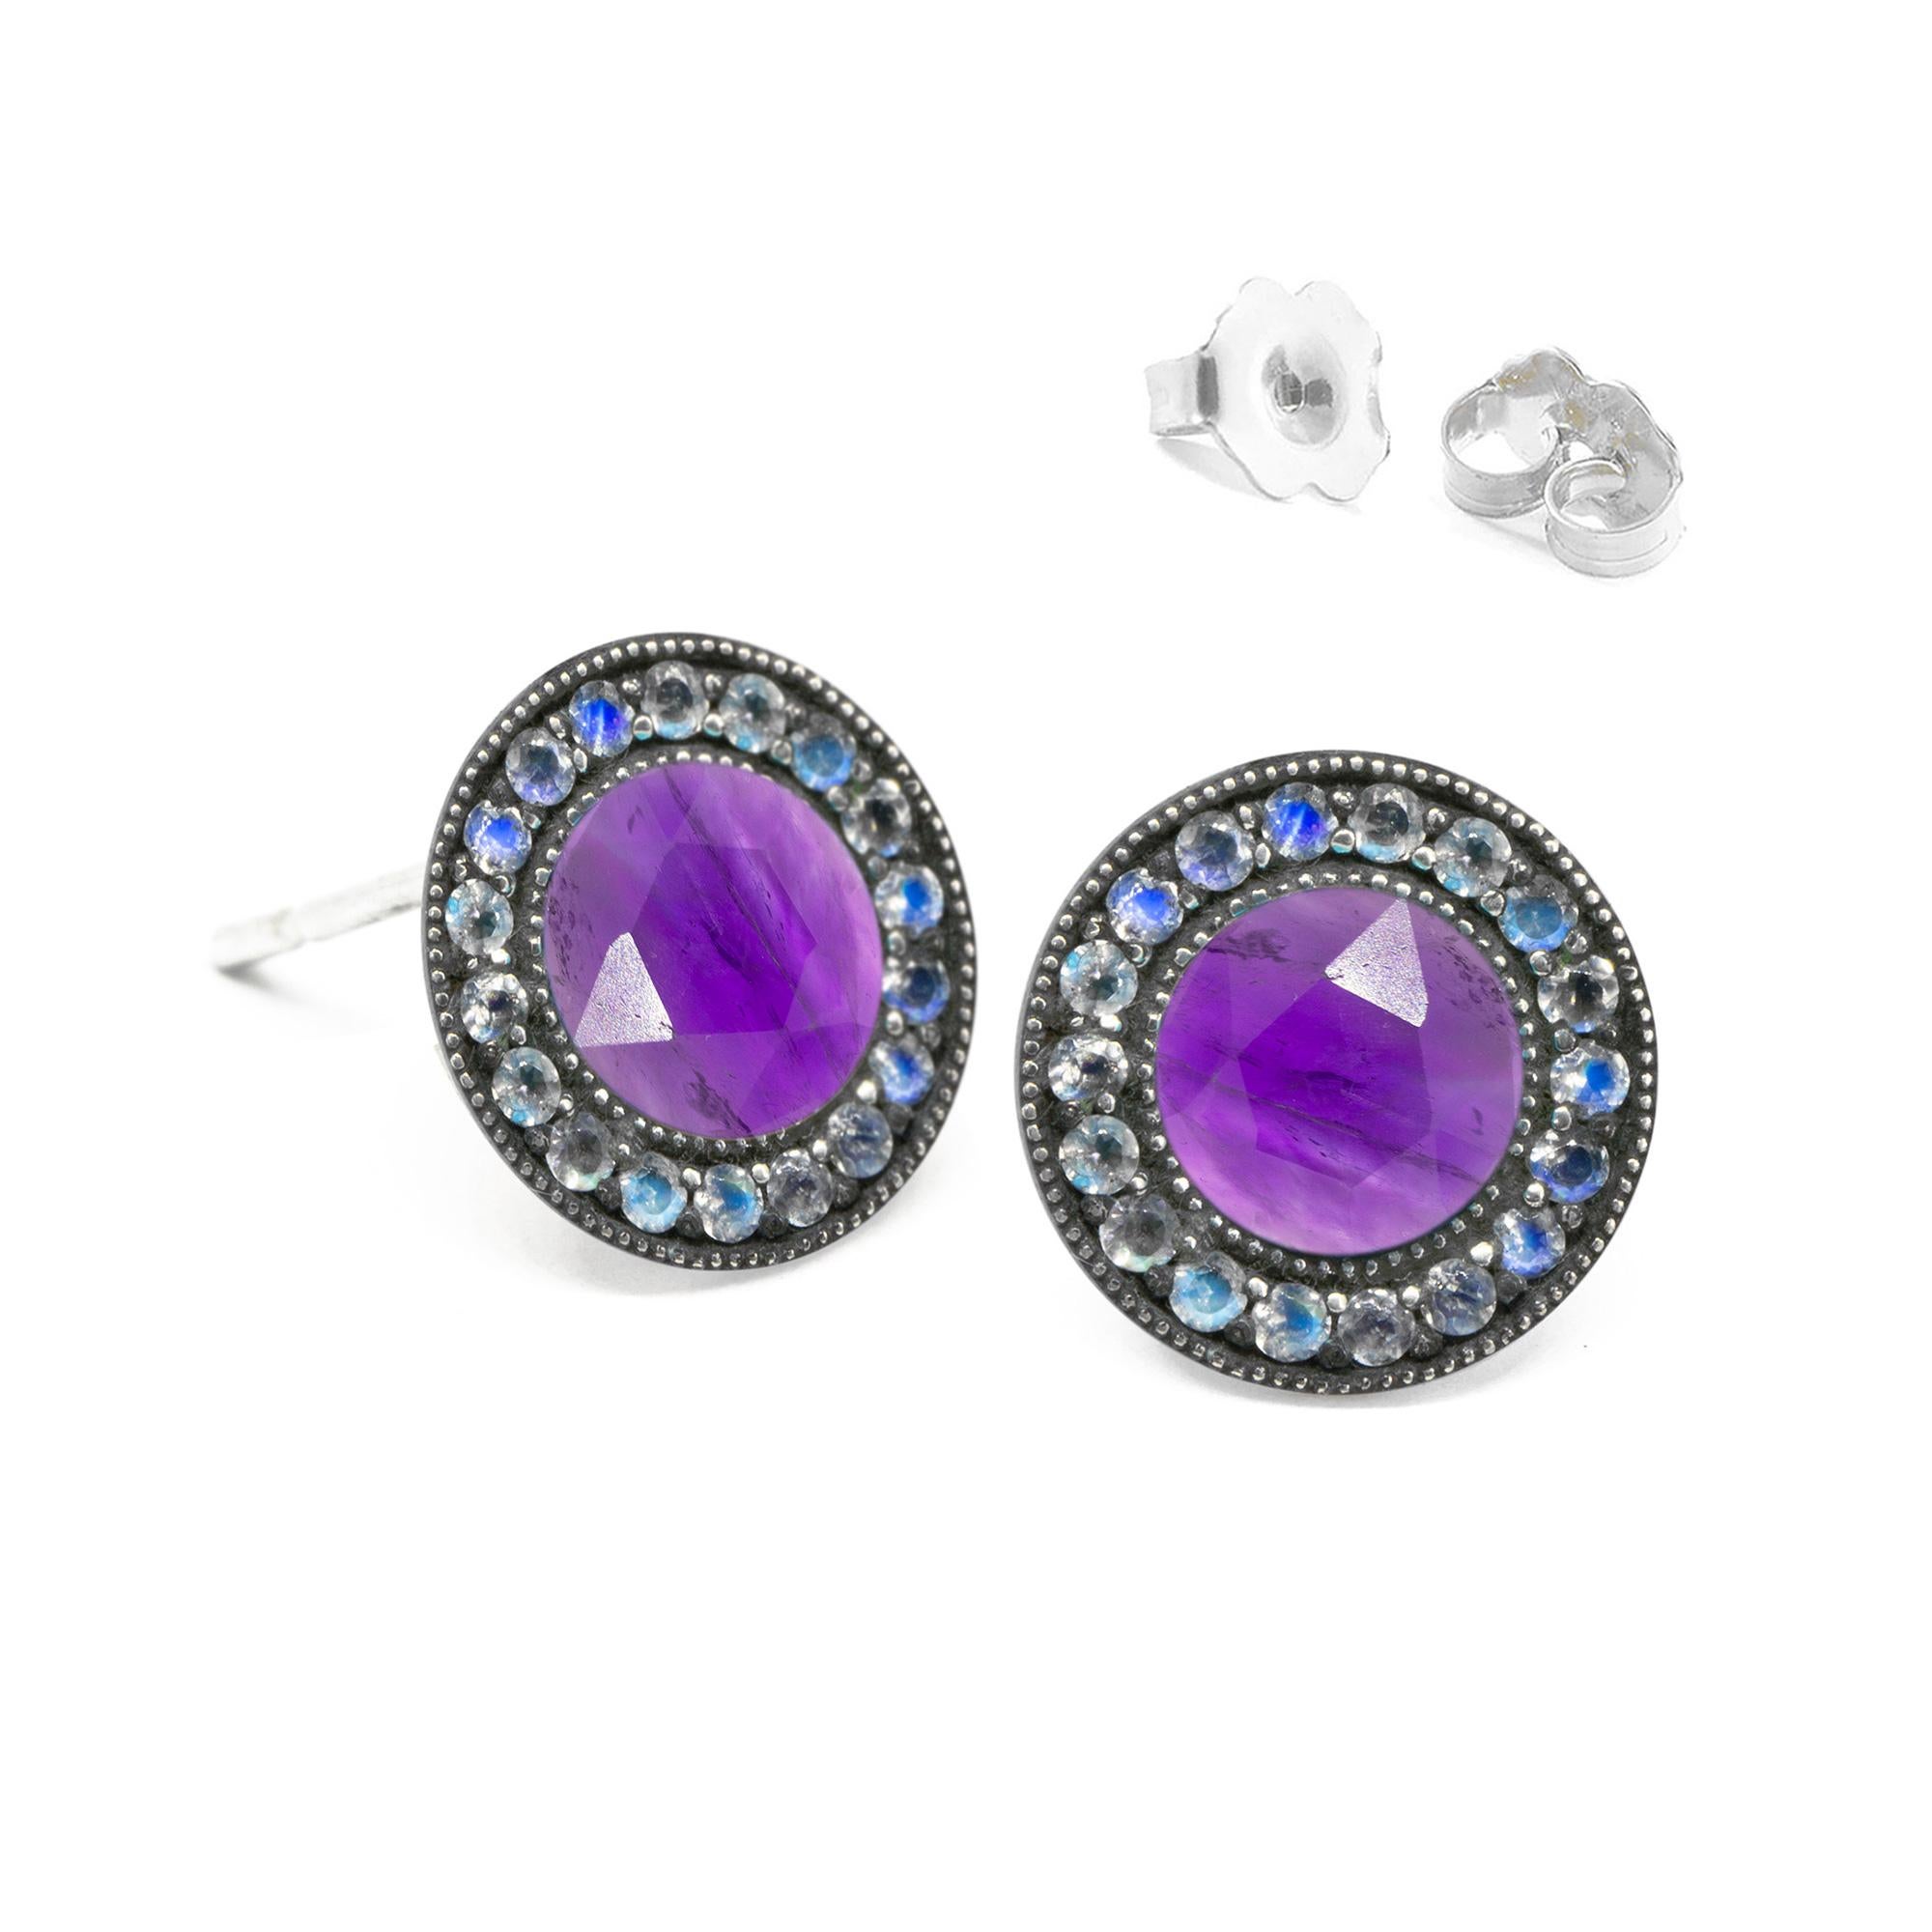 In the Moonstone Orbit Oxidized Studs, concentric circles of engraved blackened silver and luminous moonstones surround amethyst stones for a cool mix of textures and lusters.

Nina Nguyen Design's patent-pending earrings have an element on the back